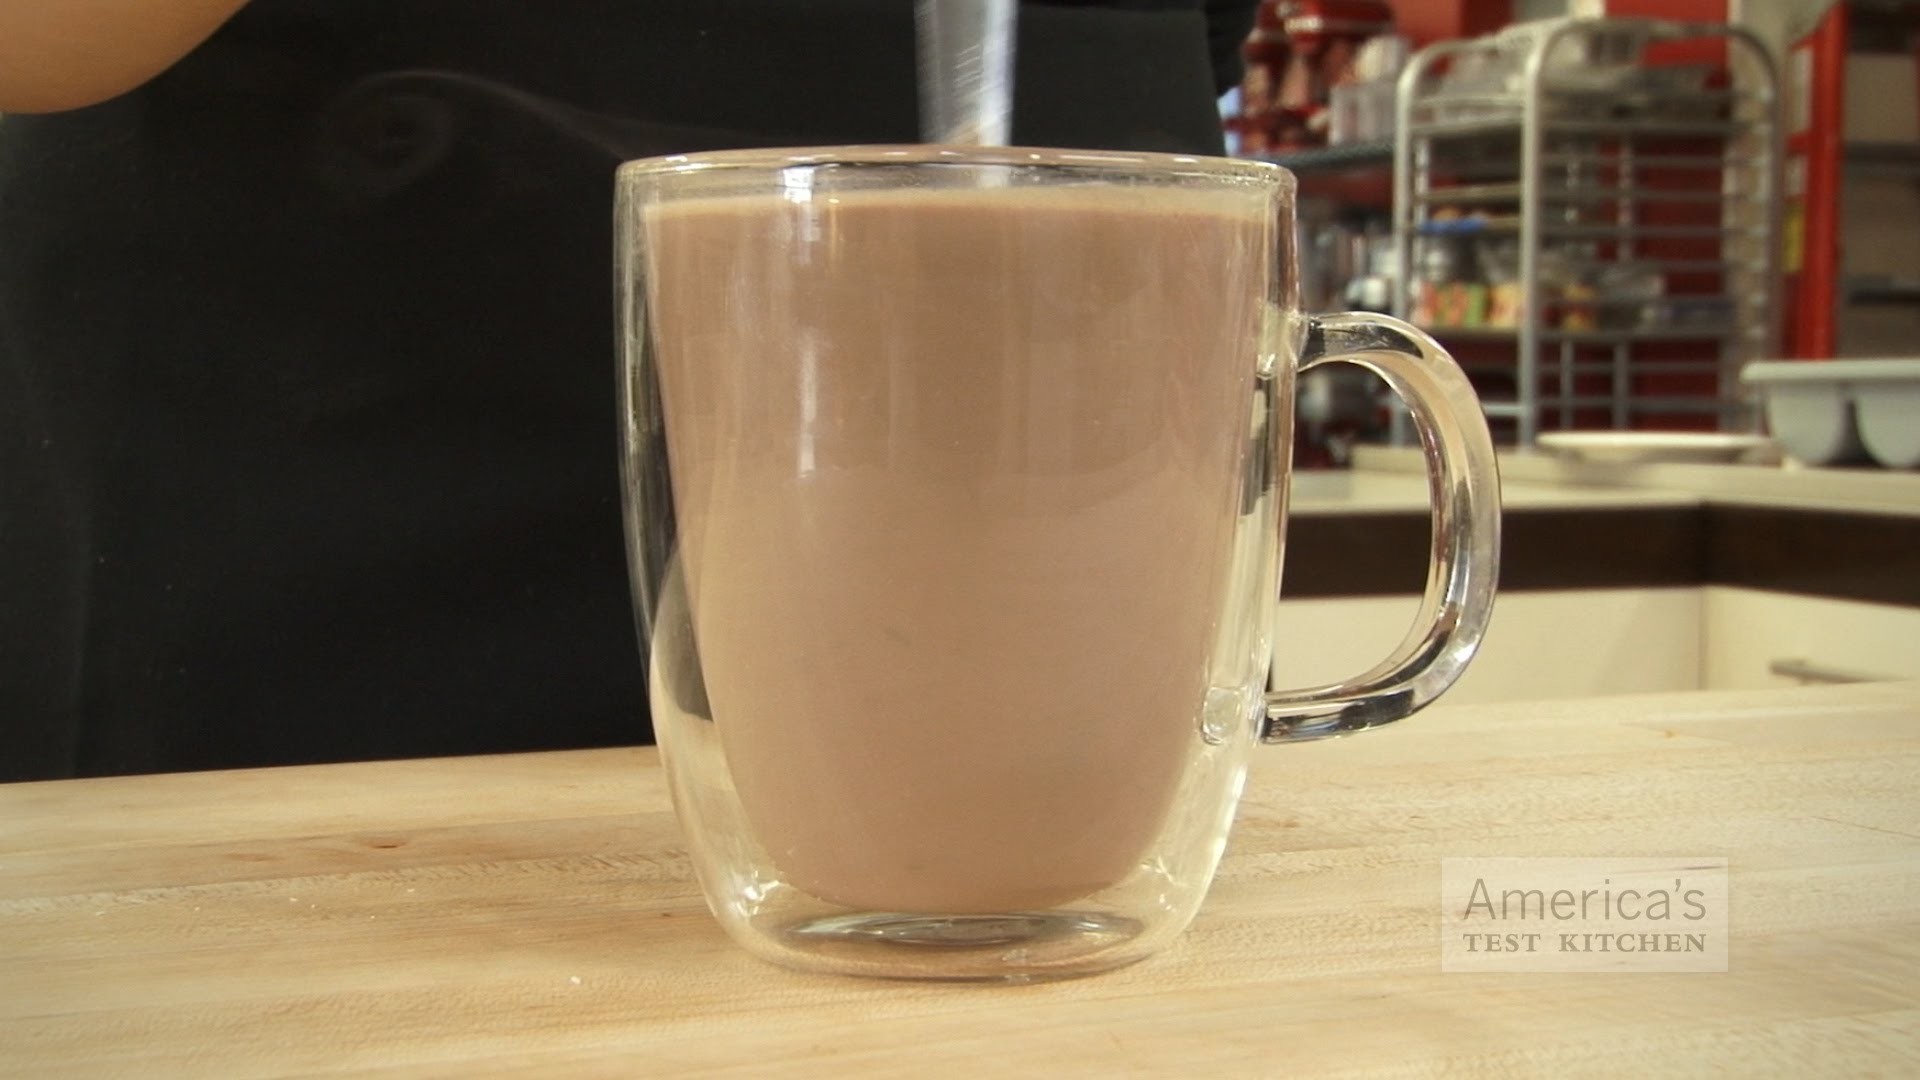 Super Quick Video Tips: DIY Instant Hot Chocolate in a Mind-Blowing Form